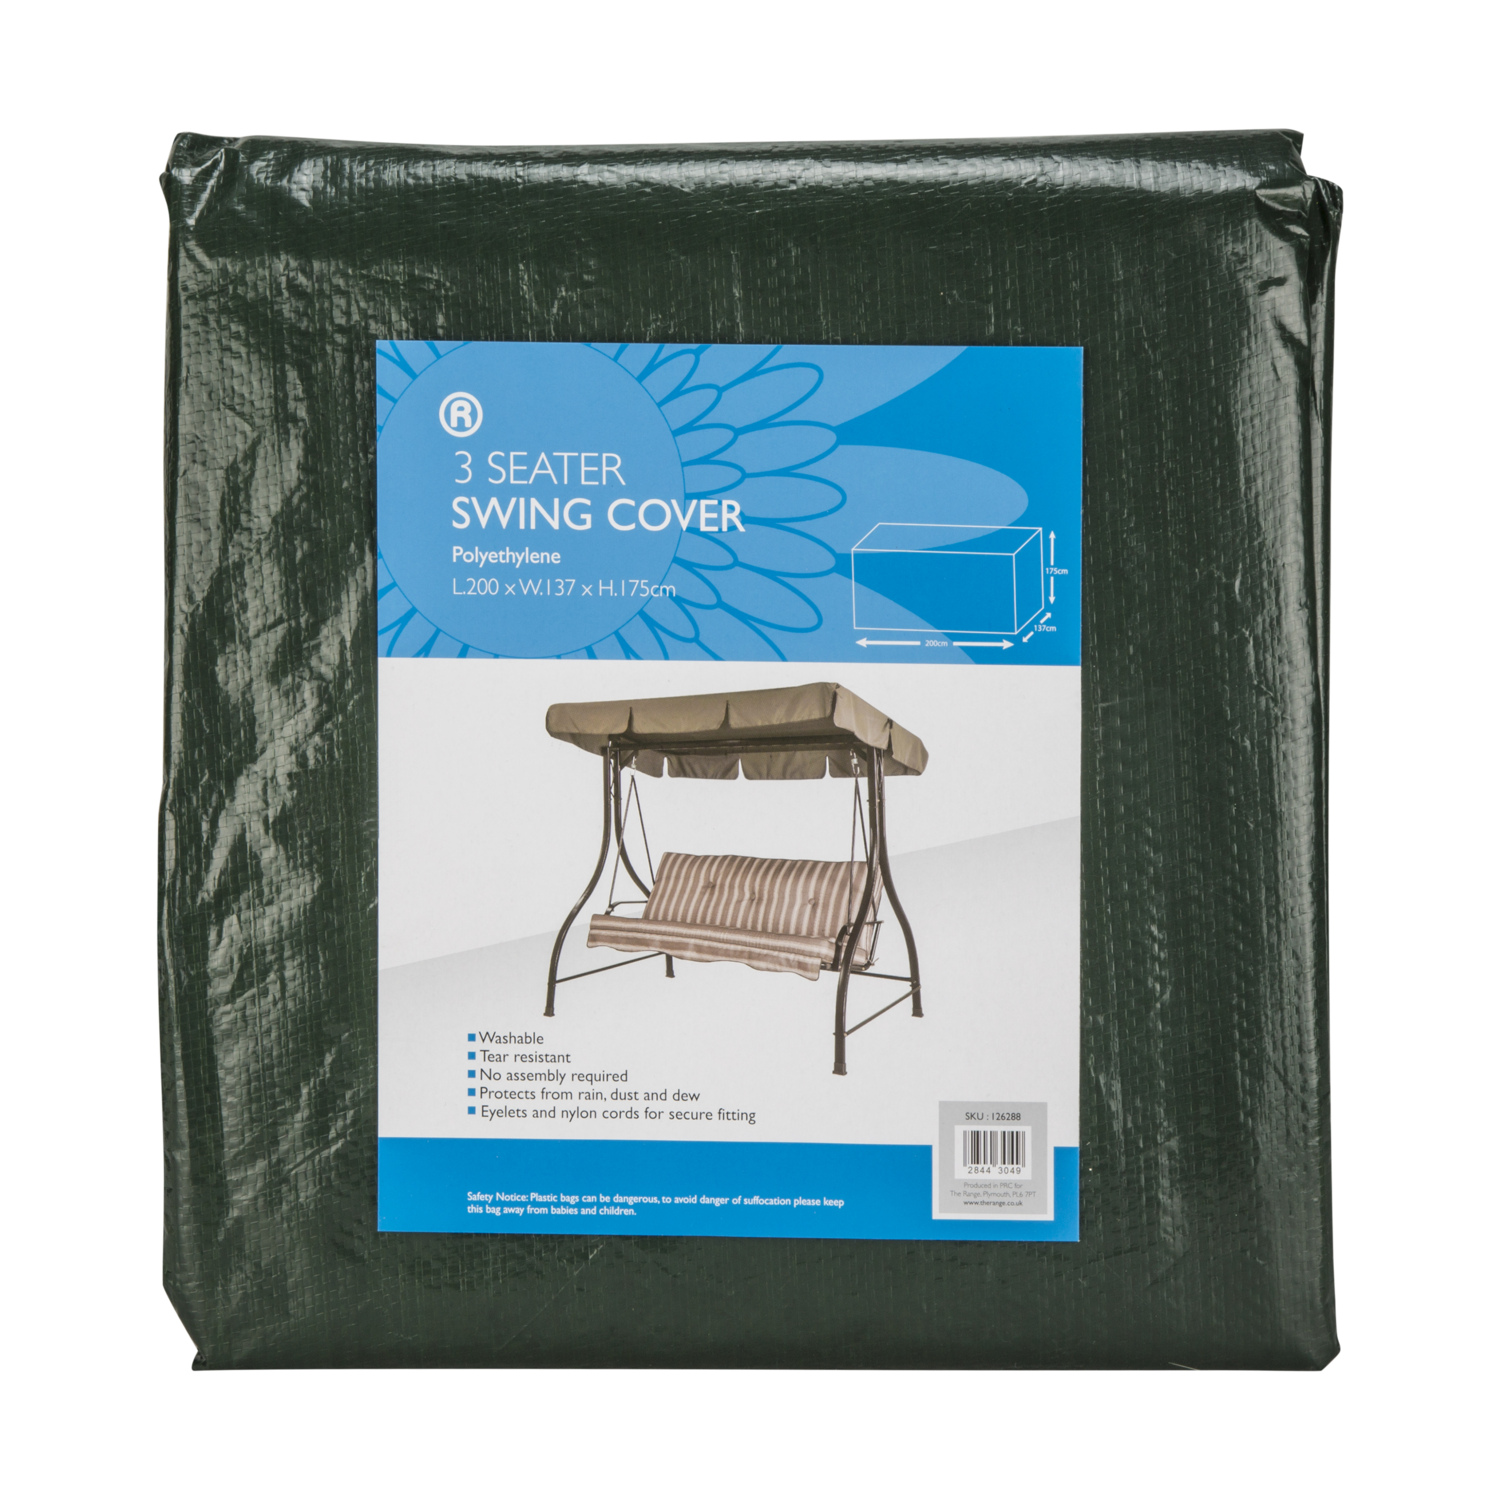 Green 3 Seater Swing Cover Image